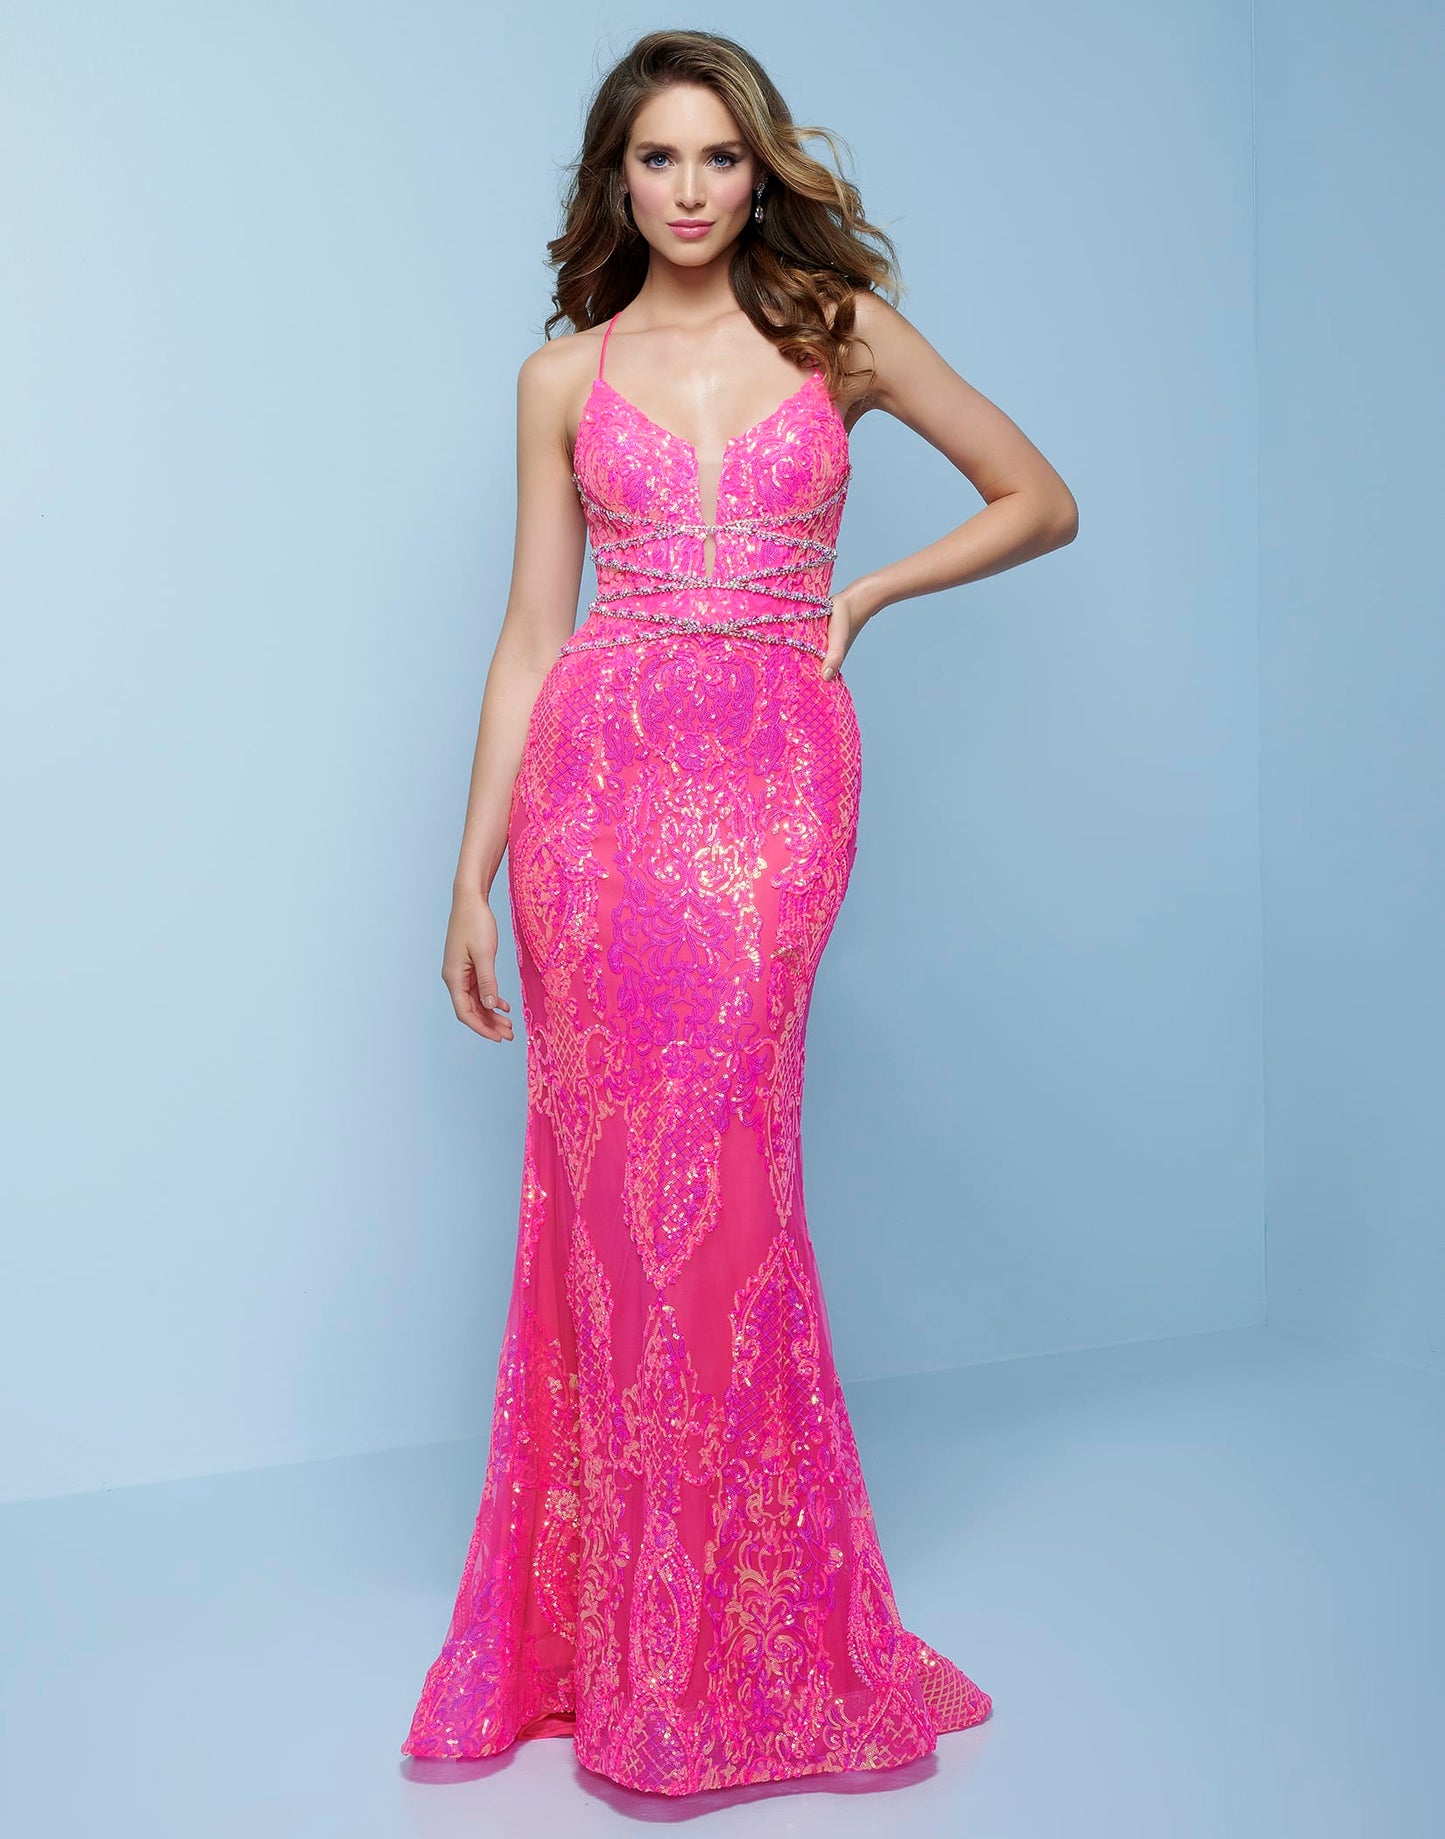 Splash Prom K526 This is a neon sequin column prom dress with low open lace up tie back.  This evening pageant gown features a plunging v neckline with criss cross beading in the front. Colors Neon Pink, Neon Blue Sizes  00, 0, 2, 4, 6, 8, 10, 12, 14, 16, 18, 20, 22, 24, 26, 28